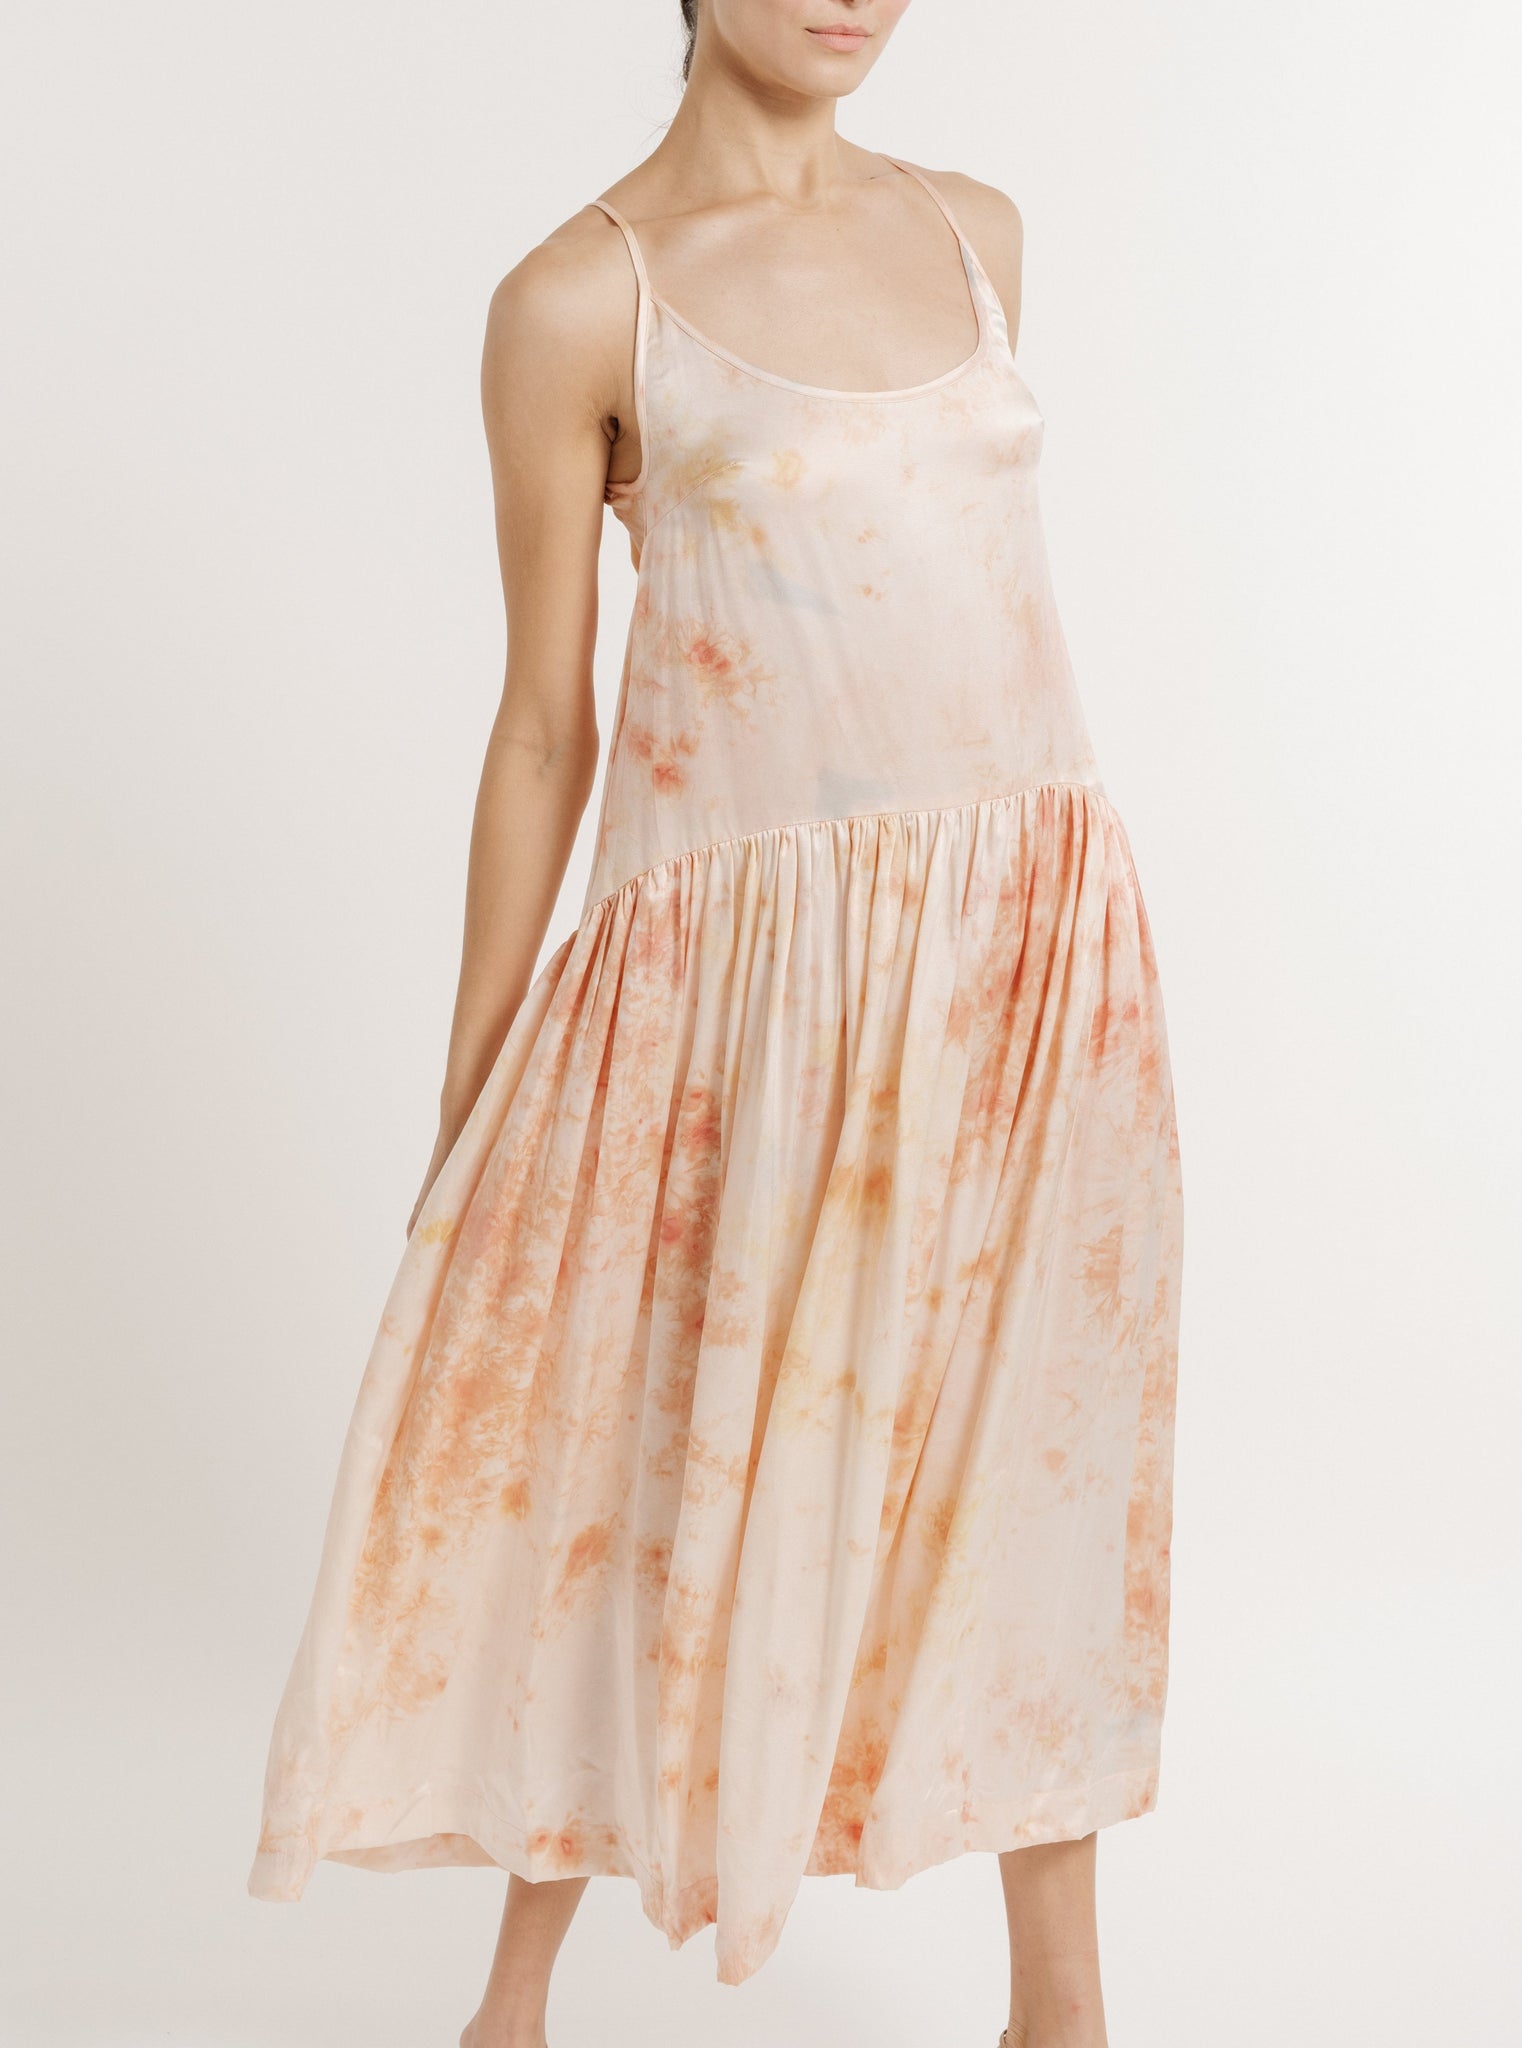 A woman in a white and orange Silk Midi Slip Dress - Botanical Ice Dye stands against a light background.